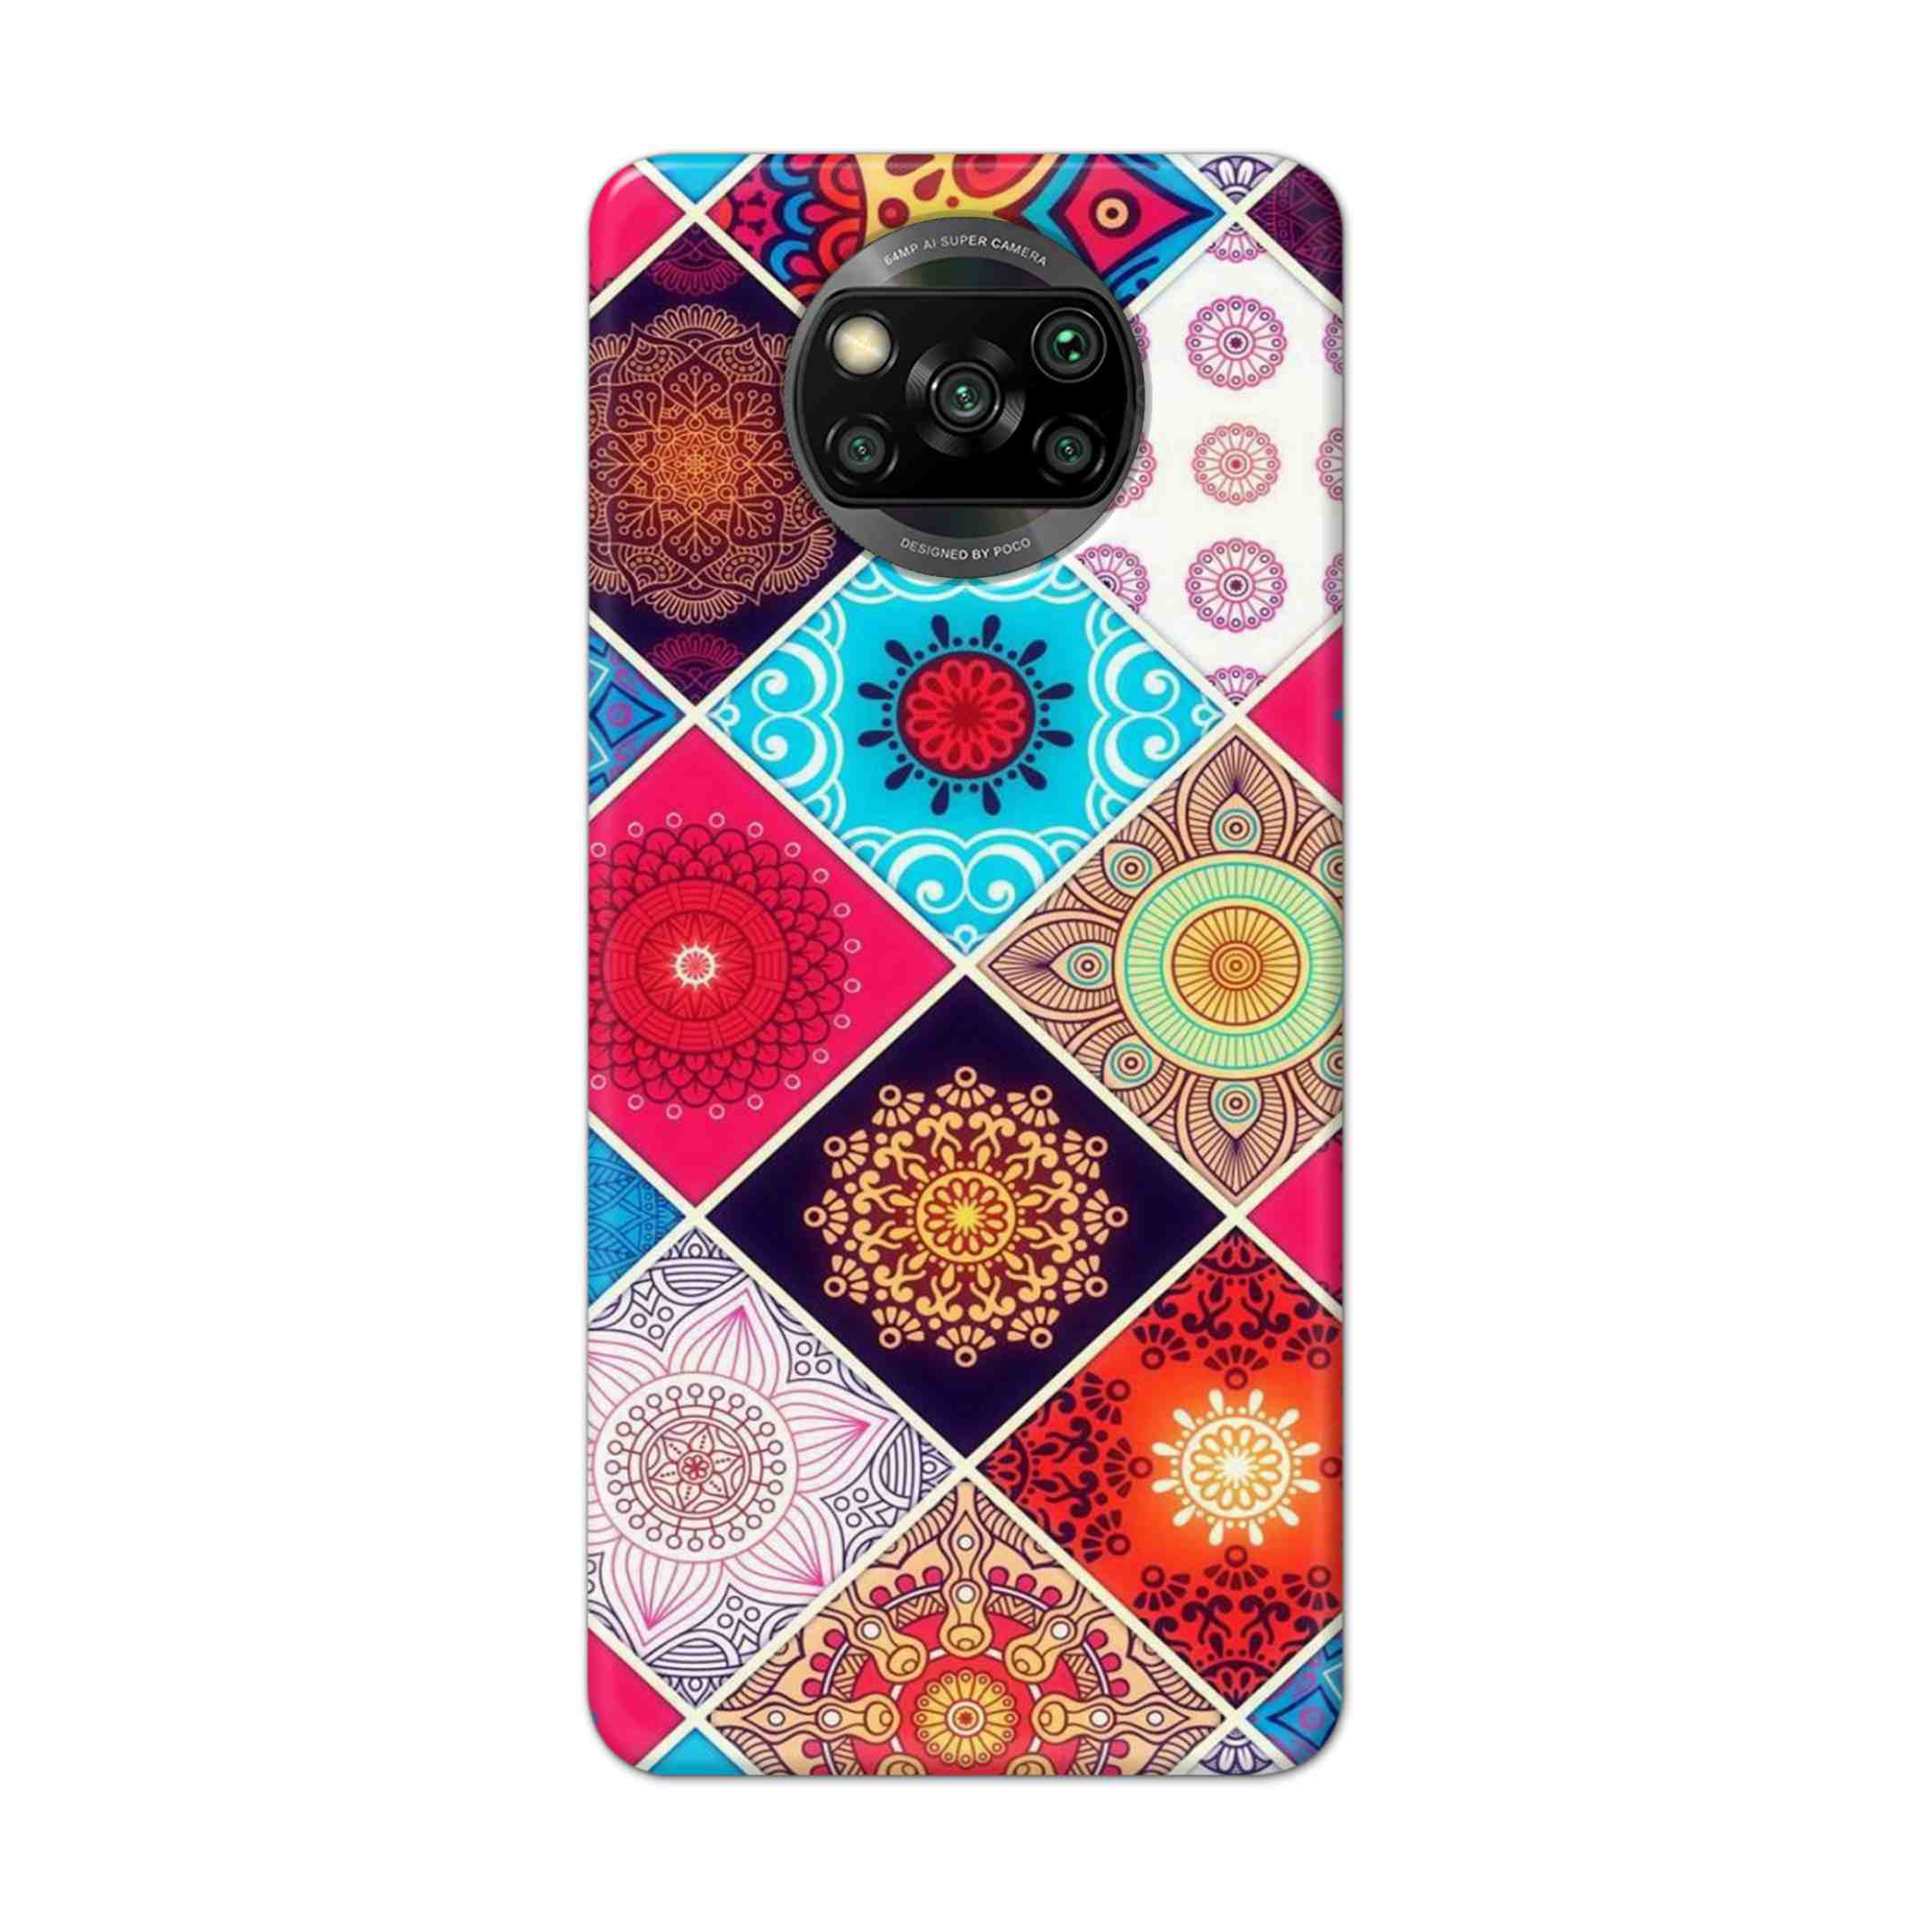 Buy Rainbow Mandala Hard Back Mobile Phone Case Cover For Pcoc X3 NFC Online